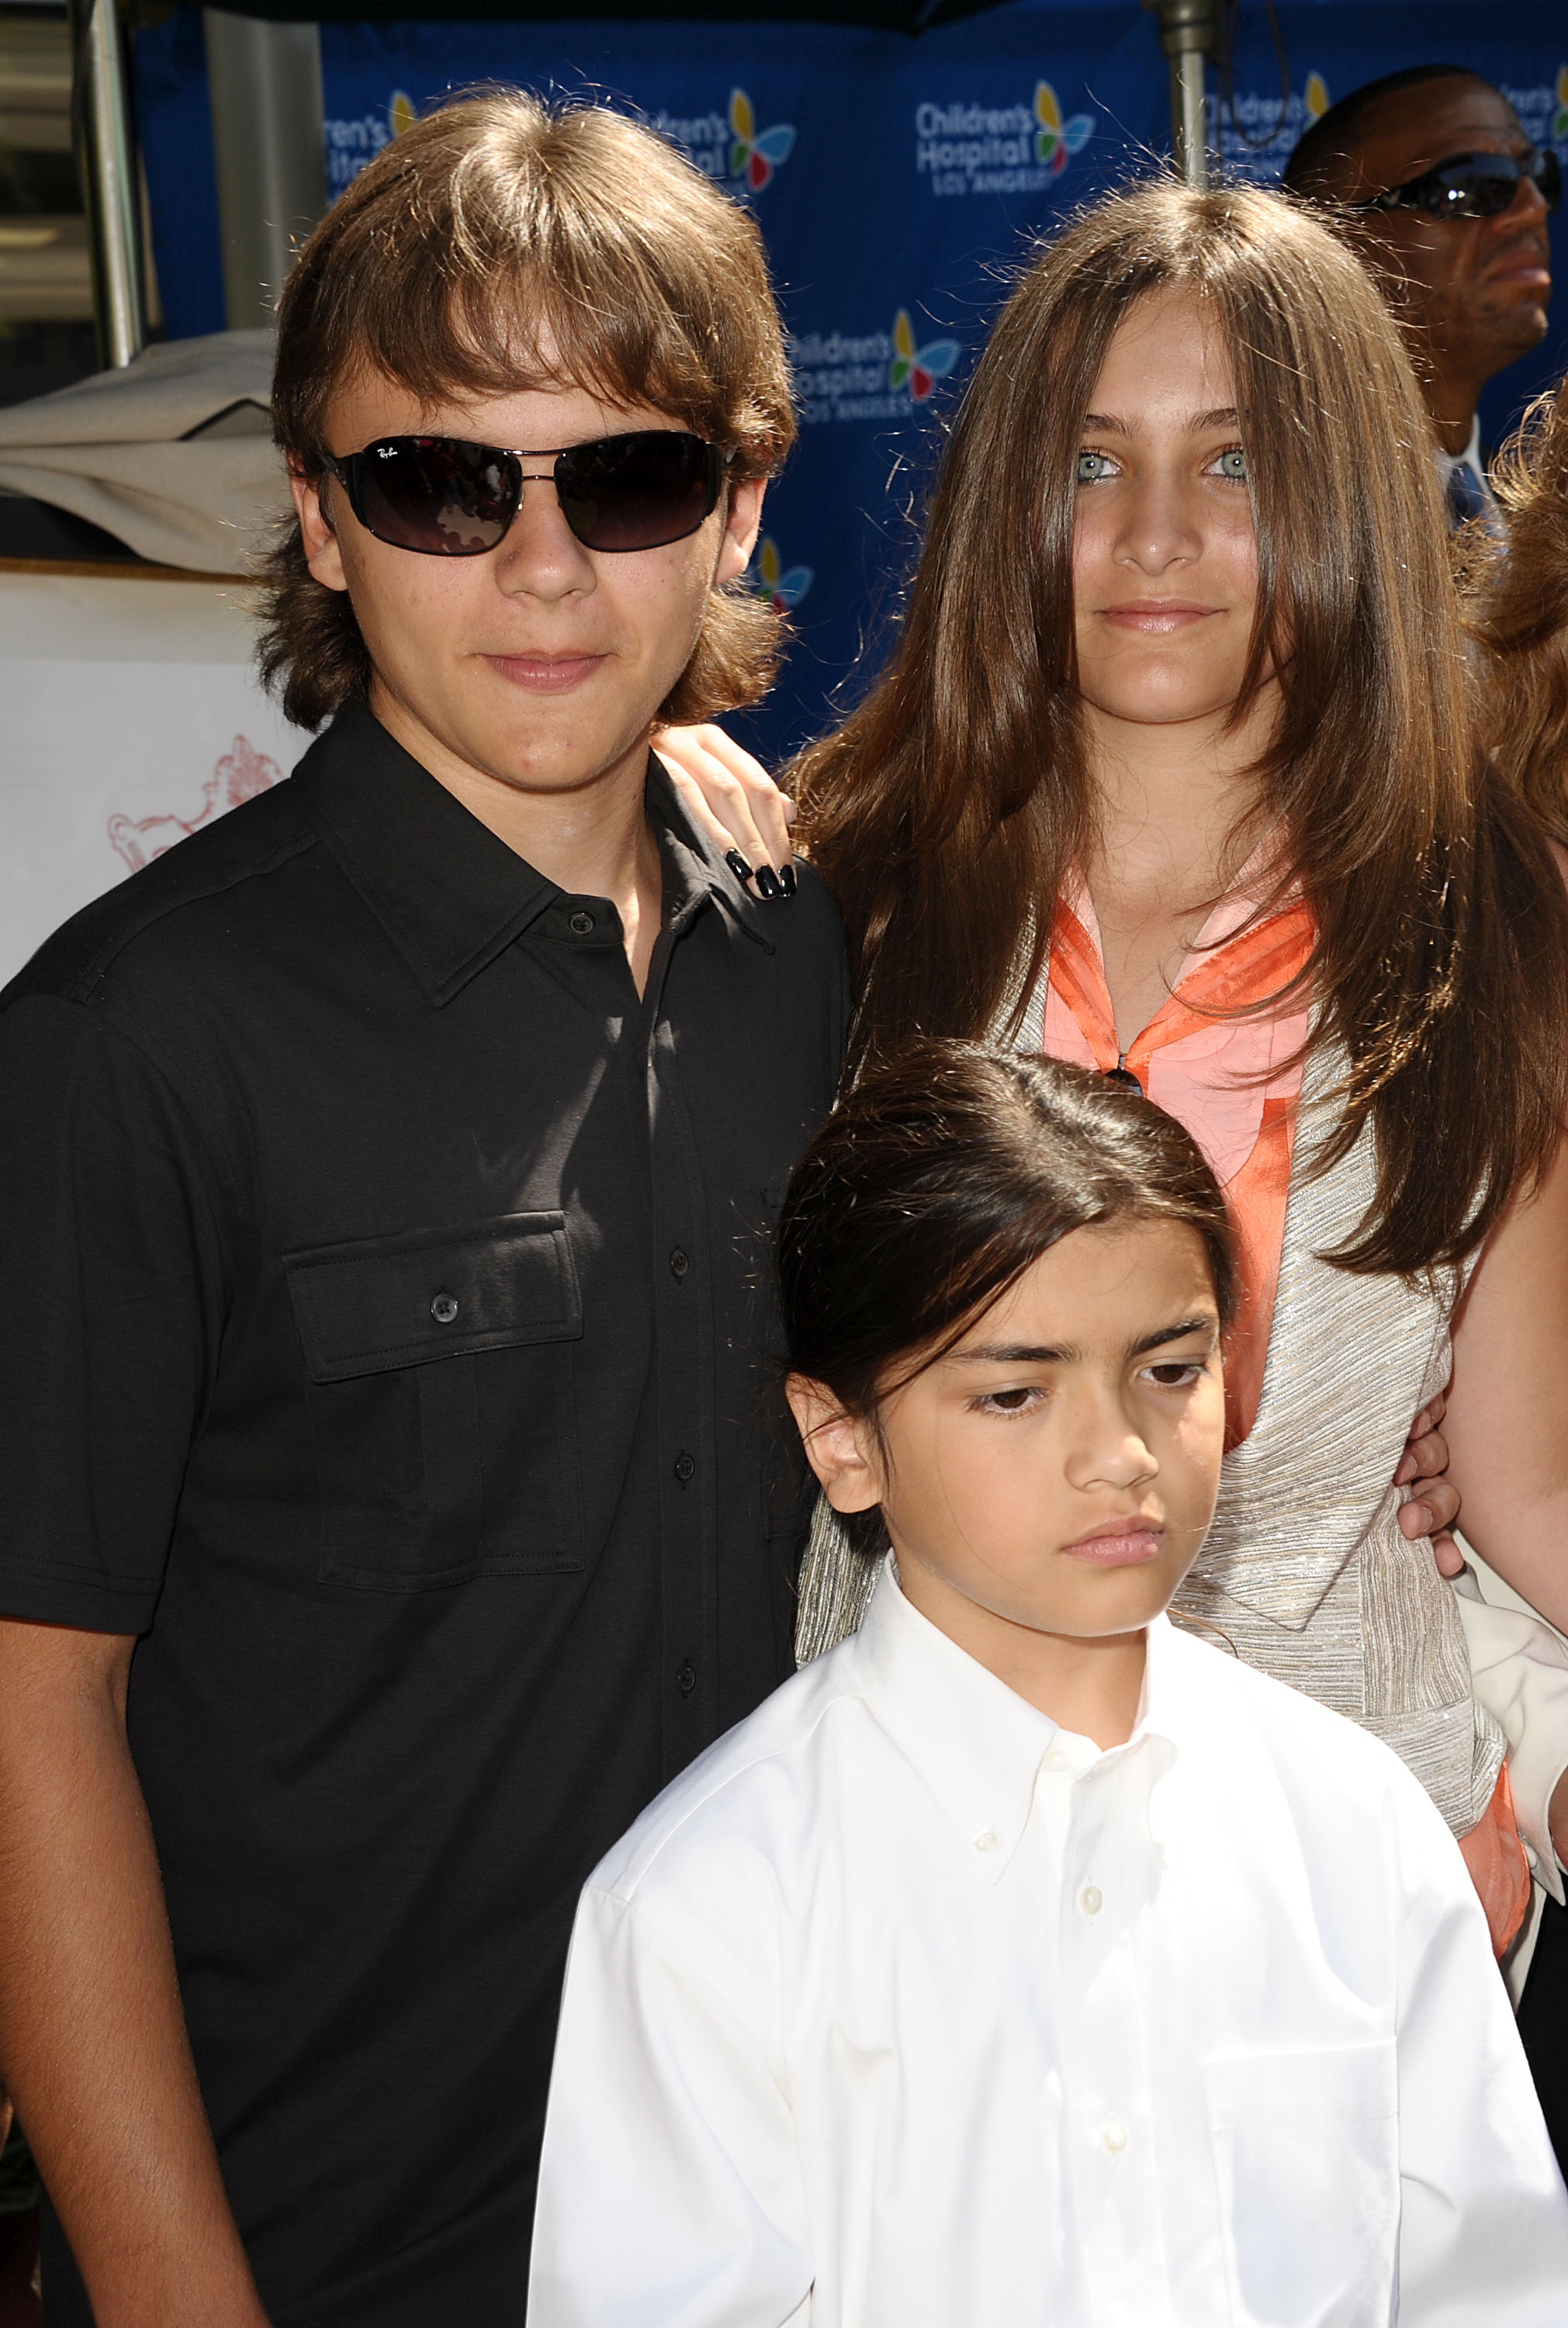 Prince Michael, Paris Jackson, and Prince Michael Jackson II, Paris, and Prince Michael Jackson attend the Jackson Family donation event on August 8, 2011 in Los Angeles, California | Source: Getty Images